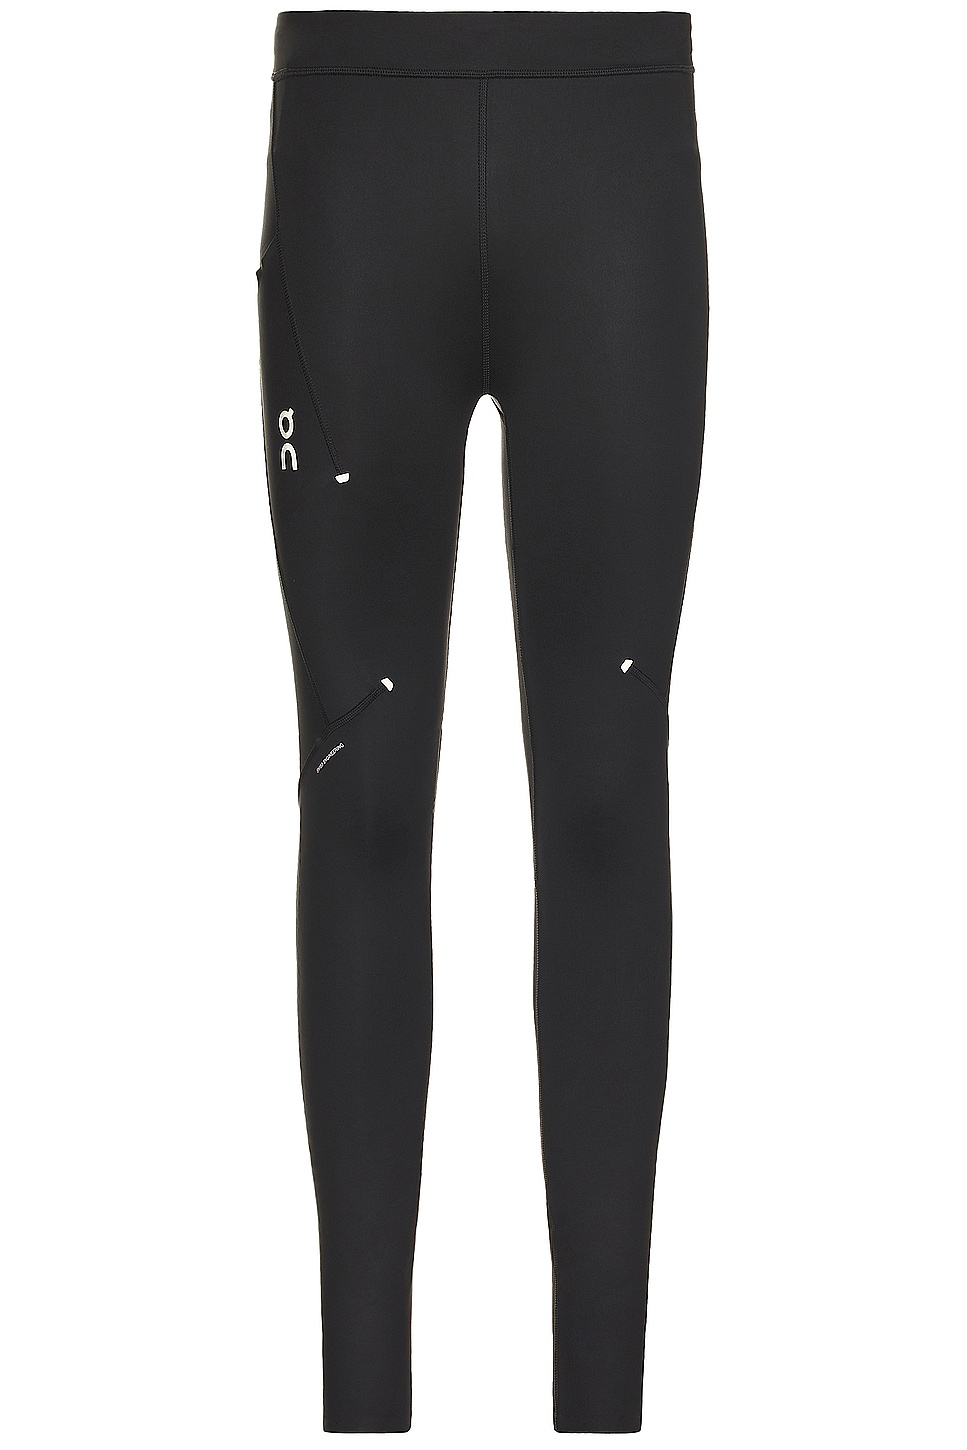 Image 1 of On Performance Tights in Black